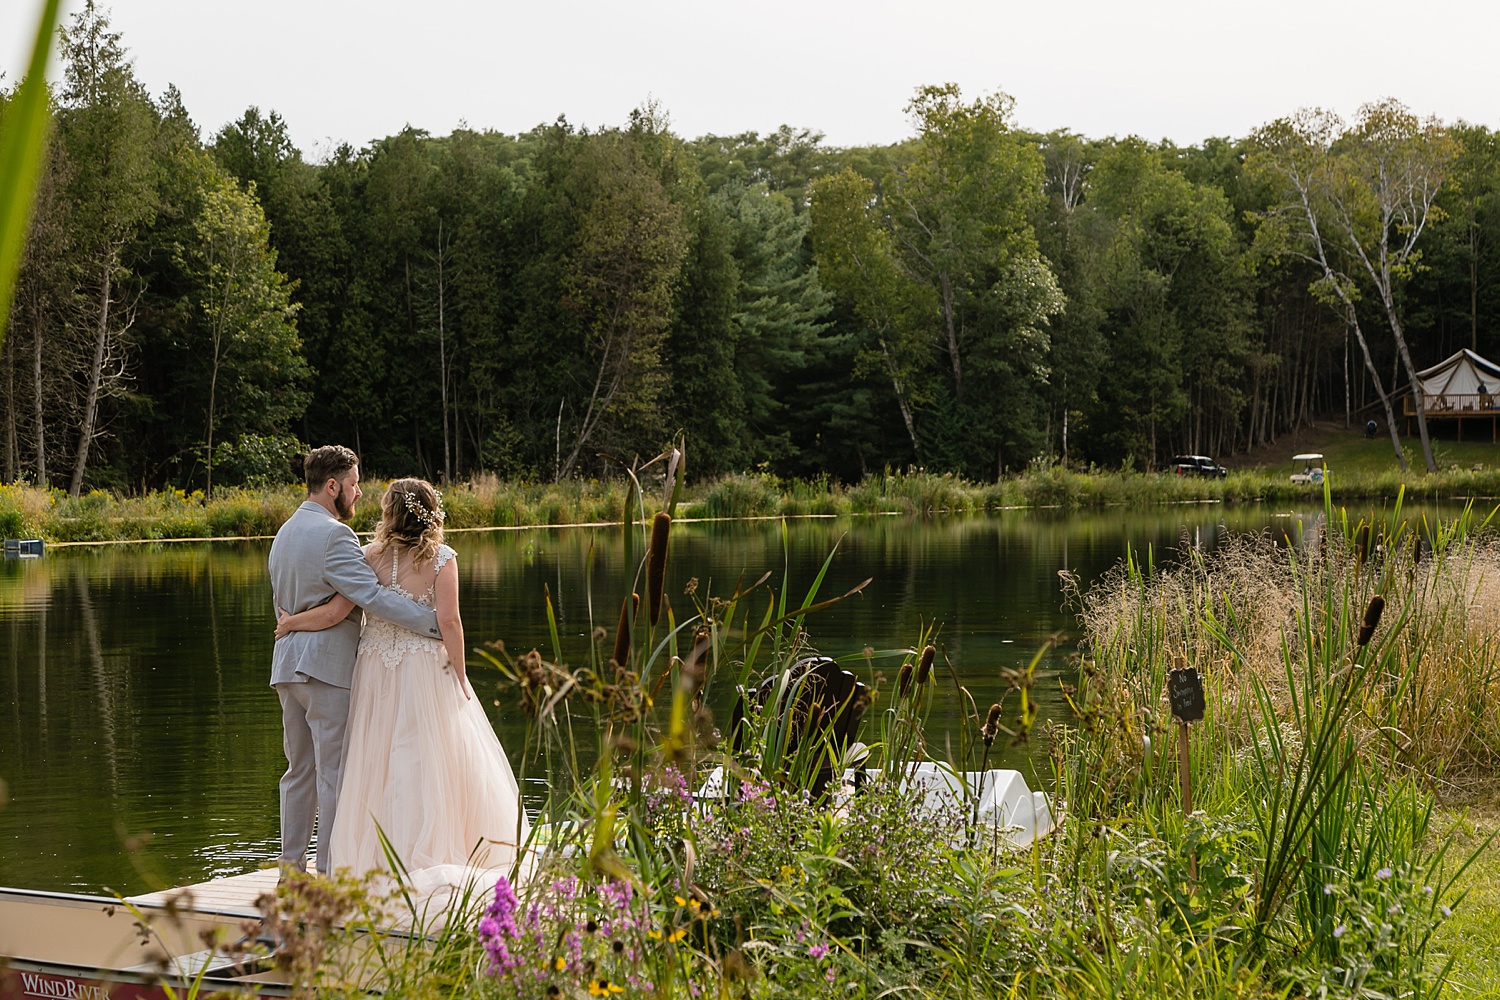 wedding photo by the pond at whispering springs